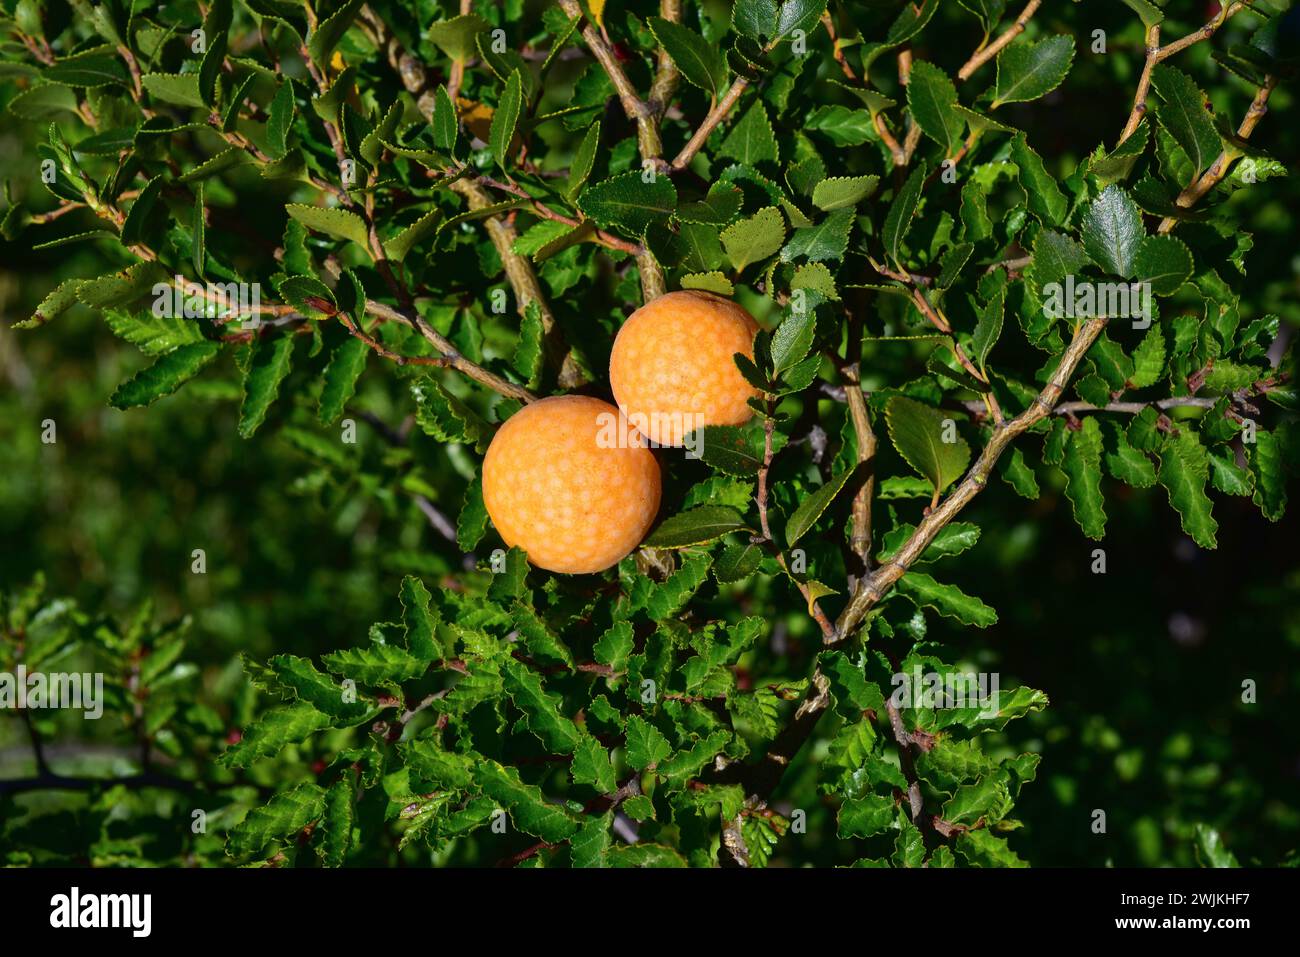 Llao-llao or pan de indio (Cyttaria harioti) is an edible mushroom parasite of Nothofagus species (in this picture N. betuloides). This photo was take Stock Photo